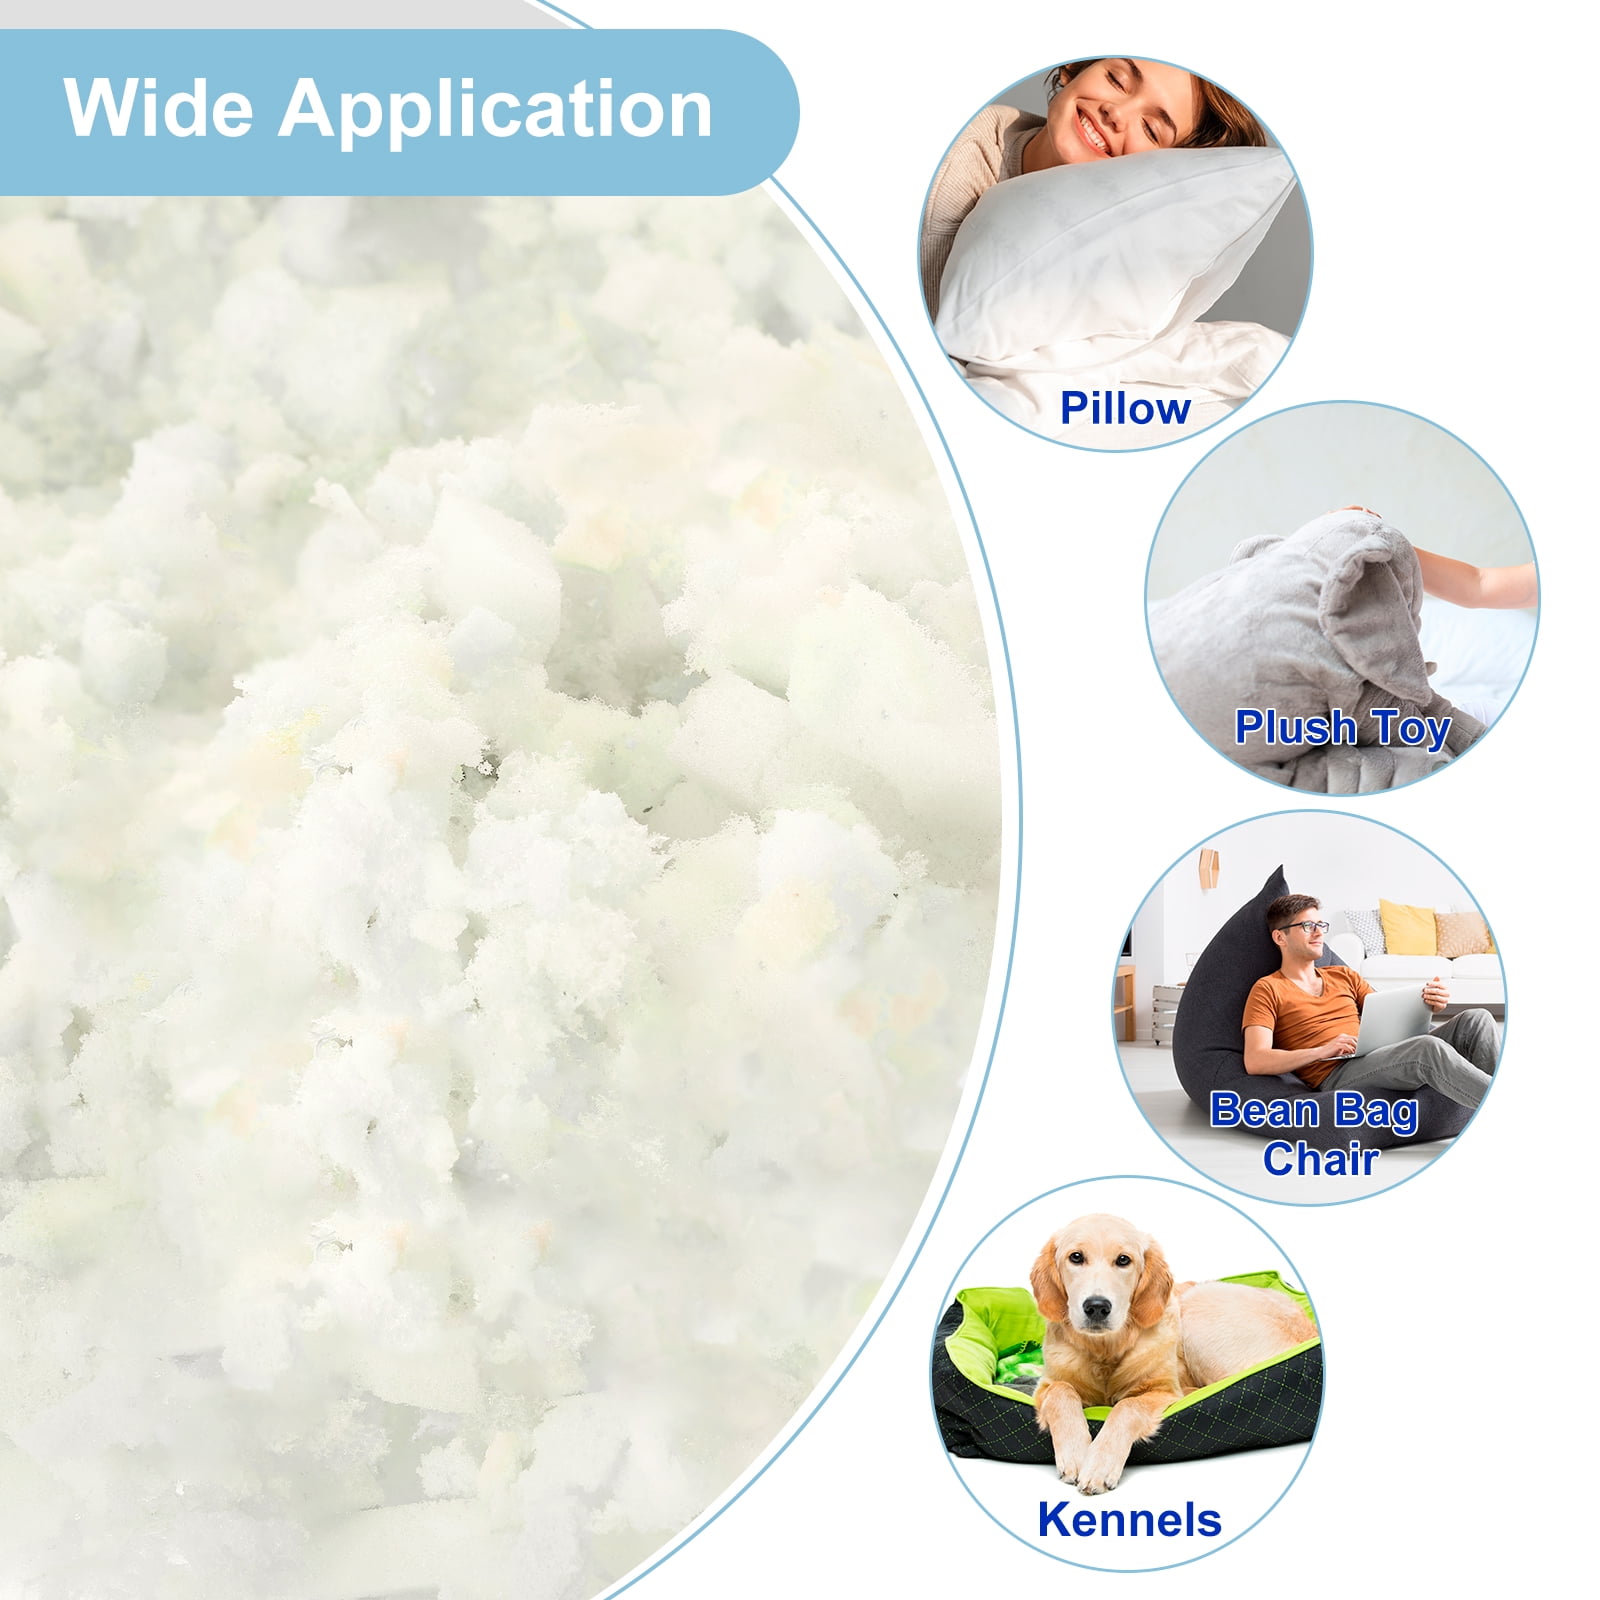 QQbed Shredded Memory Foam - Craft Foam - Replacement Fill for Pillows,  Bean Bags, Sofa Chair Cushion, Dog Beds, Stuffed Animals, Upholstery  Furniture